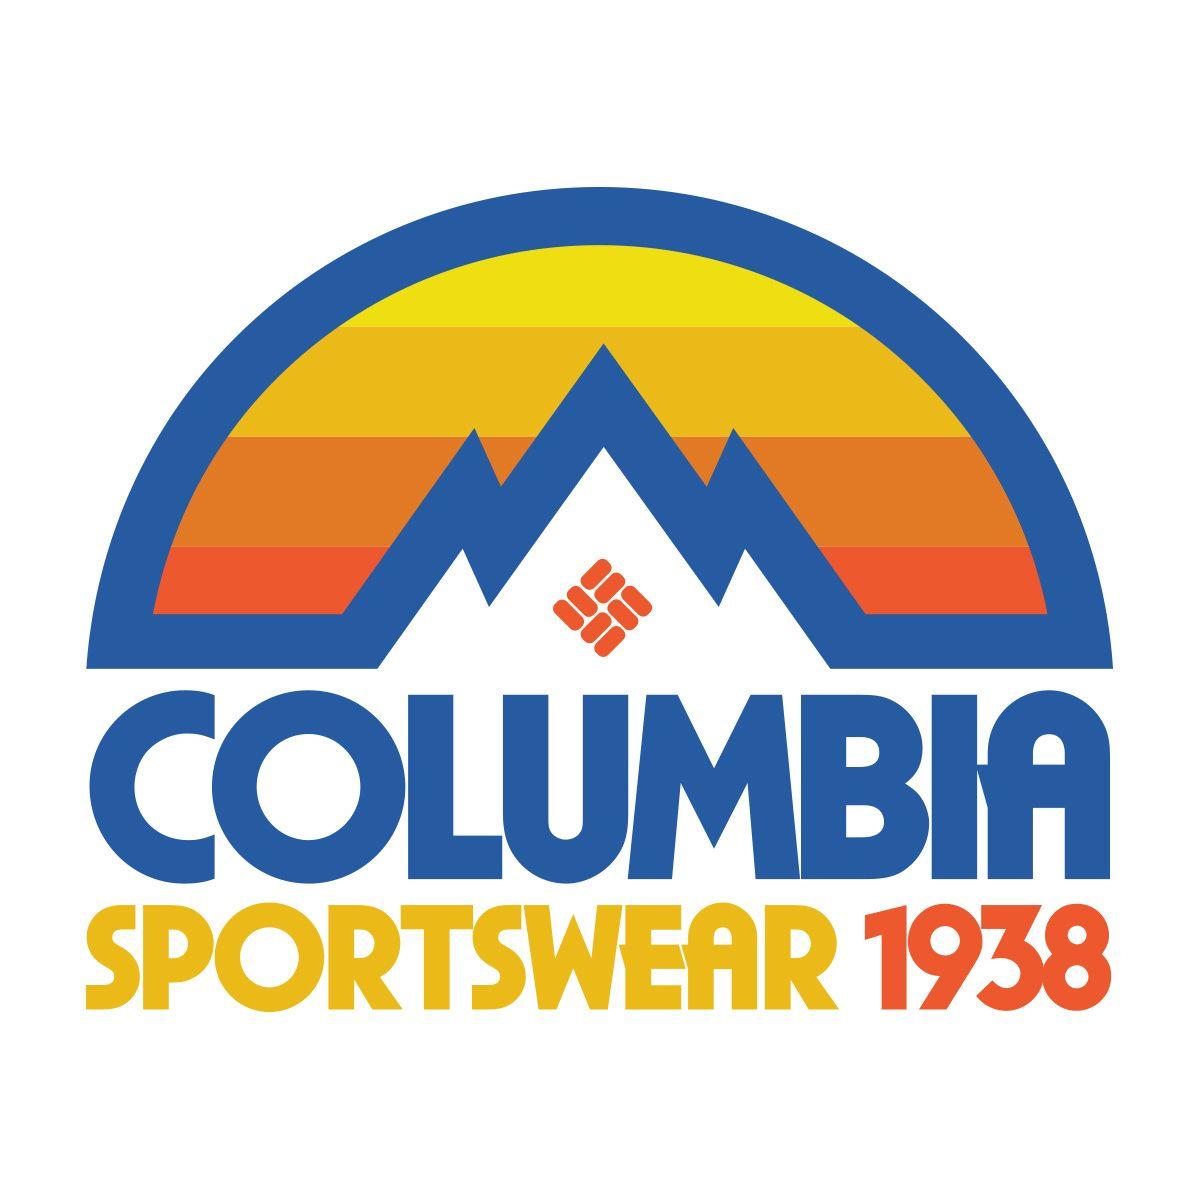 Columbia Sportswear Logo - Columbia Sportswear - Branding + Apparel Graphics for Athletic and ...